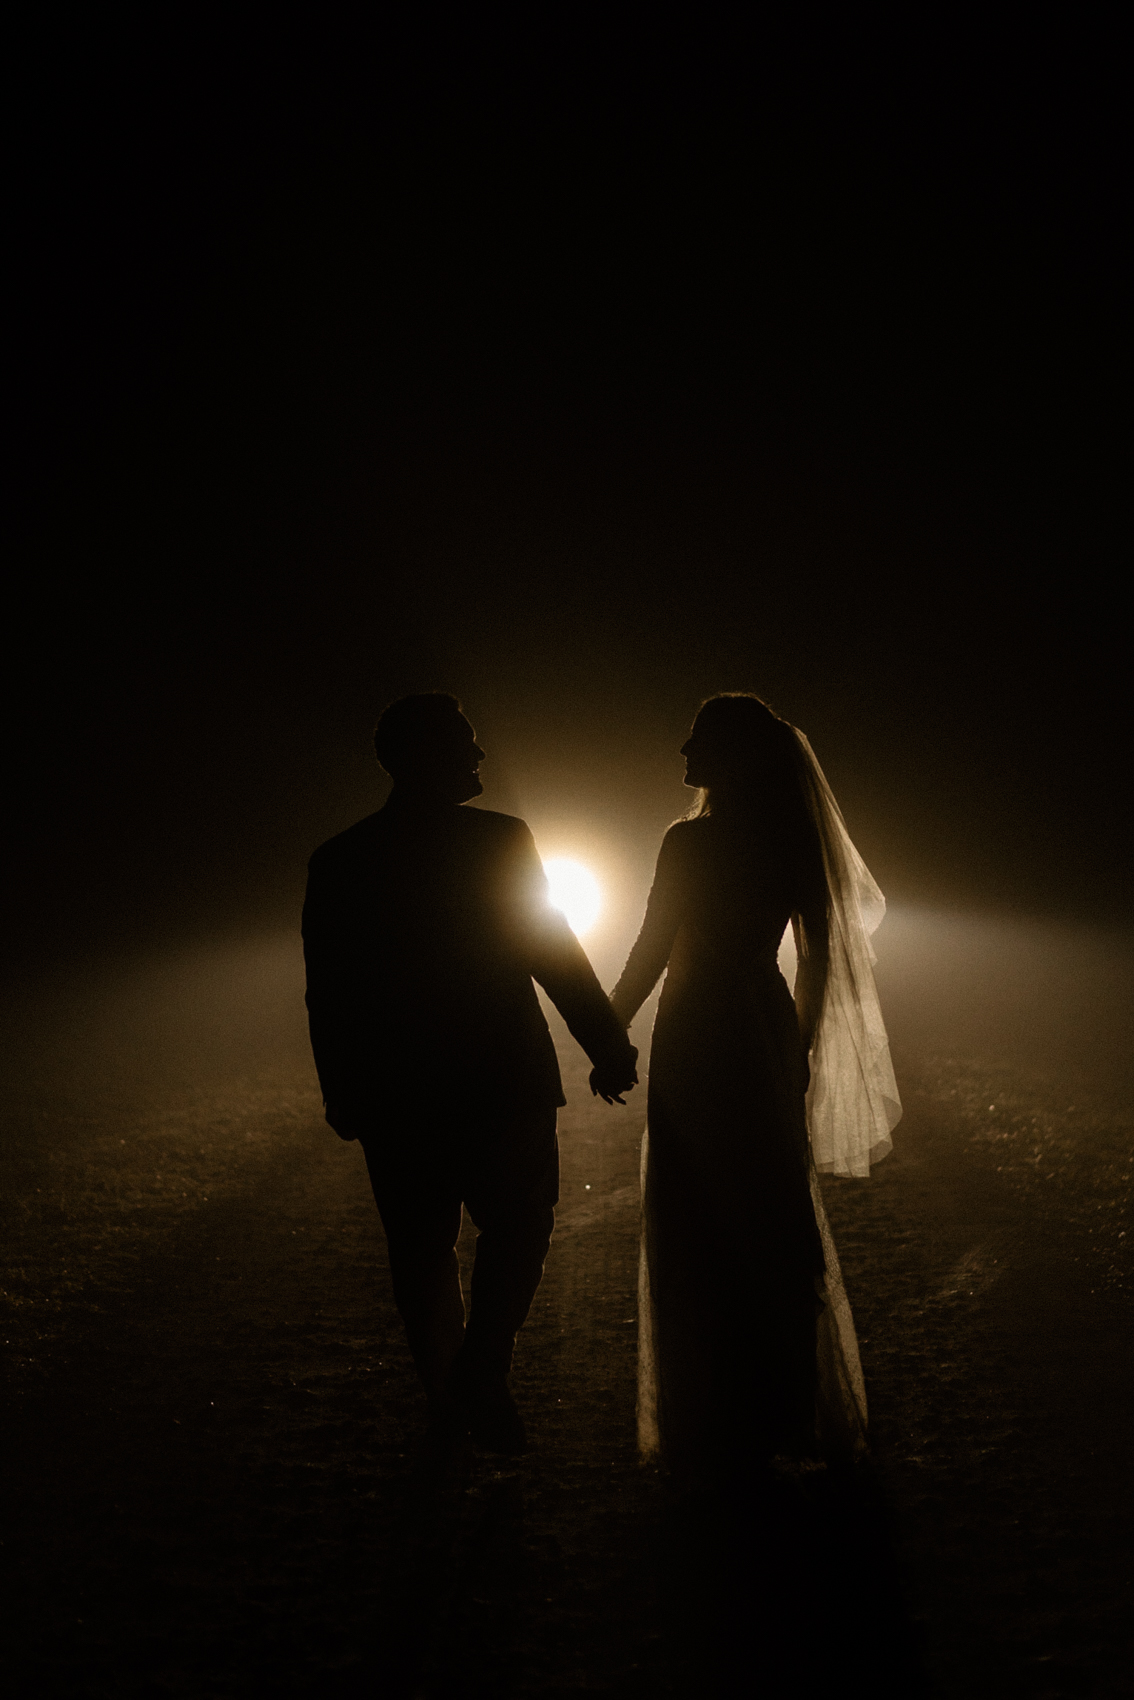 A silhouette image of a bridal party at a Bimbadgen Palmers Lane wedding